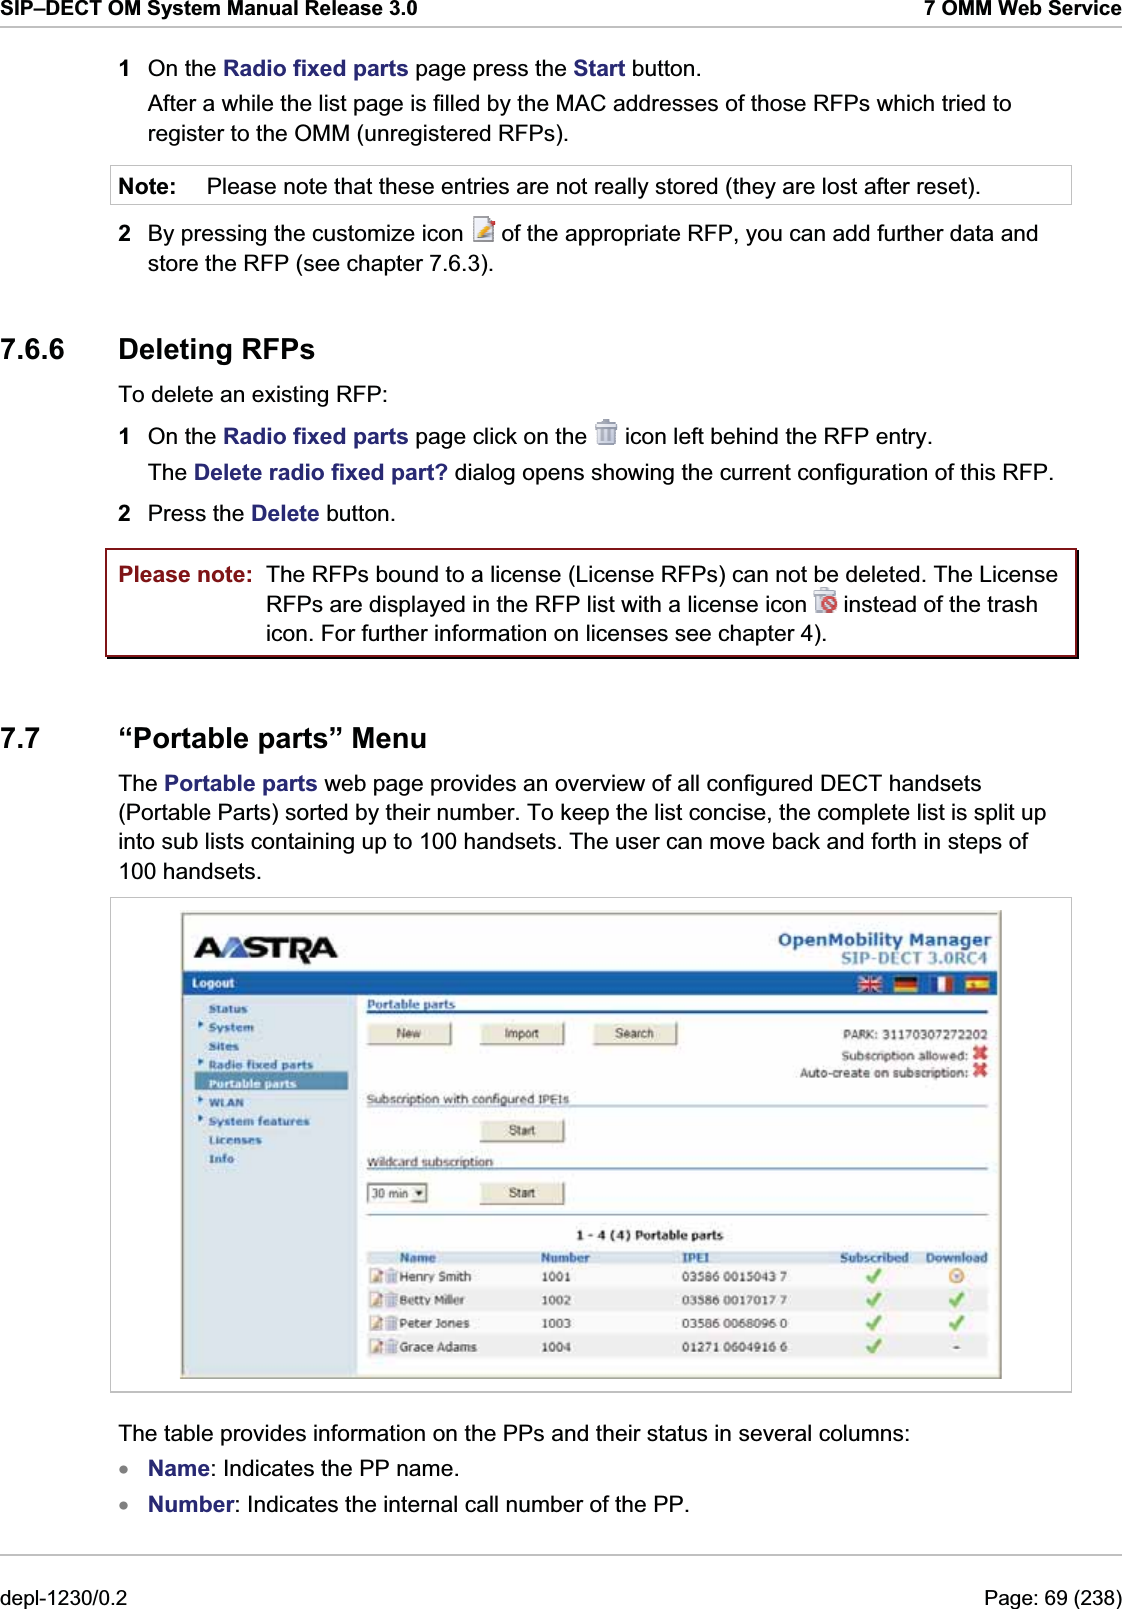 SIP–DECT OM System Manual Release 3.0  7 OMM Web Service 1  On the Radio fixed parts page press the Start button. After a while the list page is filled by the MAC addresses of those RFPs which tried to register to the OMM (unregistered RFPs). Note:  Please note that these entries are not really stored (they are lost after reset).  2  By pressing the customize icon   of the appropriate RFP, you can add further data and store the RFP (see chapter 7.6.3). 7.6.6 Deleting RFPs To delete an existing RFP:  1  On the Radio fixed parts page click on the   icon left behind the RFP entry. The Delete radio fixed part? dialog opens showing the current configuration of this RFP. 2  Press the Delete button. Please note:  The RFPs bound to a license (License RFPs) can not be deleted. The License RFPs are displayed in the RFP list with a license icon   instead of the trash icon. For further information on licenses see chapter 4). 7.7 “Portable parts” Menu The Portable parts web page provides an overview of all configured DECT handsets (Portable Parts) sorted by their number. To keep the list concise, the complete list is split up into sub lists containing up to 100 handsets. The user can move back and forth in steps of 100 handsets.  The table provides information on the PPs and their status in several columns: Name: Indicates the PP name. xx Number: Indicates the internal call number of the PP. depl-1230/0.2  Page: 69 (238) 